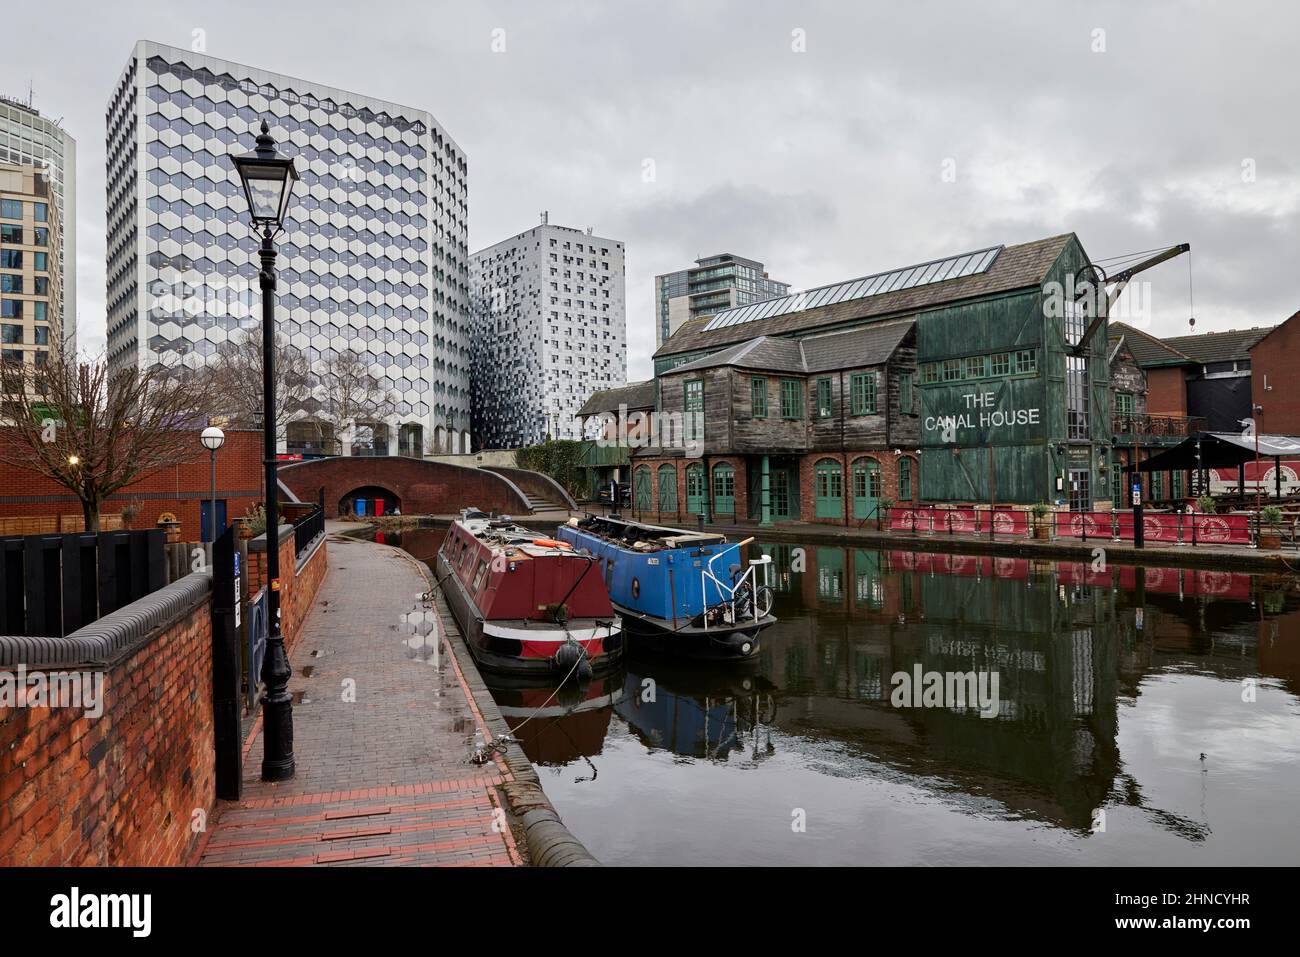 The Canal House in Birmingham with the new HMRC building in the background. Stock Photo